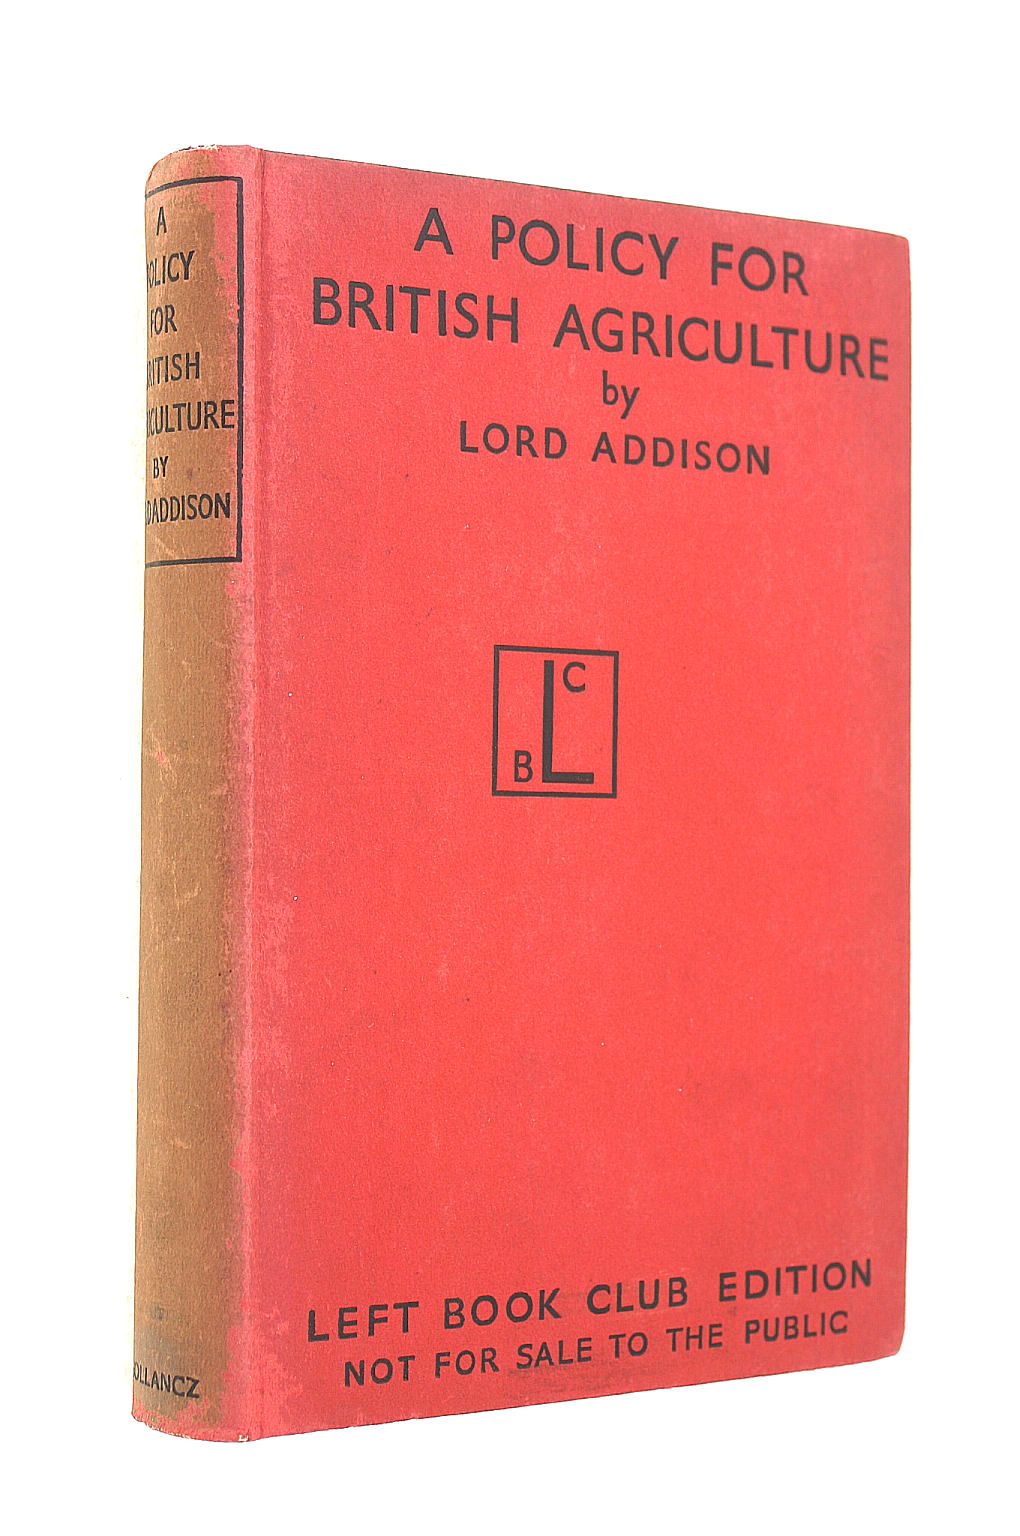 ADDISON, CHRISTOPHER ADDISON, BARON (1869-1951) - A Policy for British Agriculture / by the Rt. Honble. Lord Addison of Stallingborough